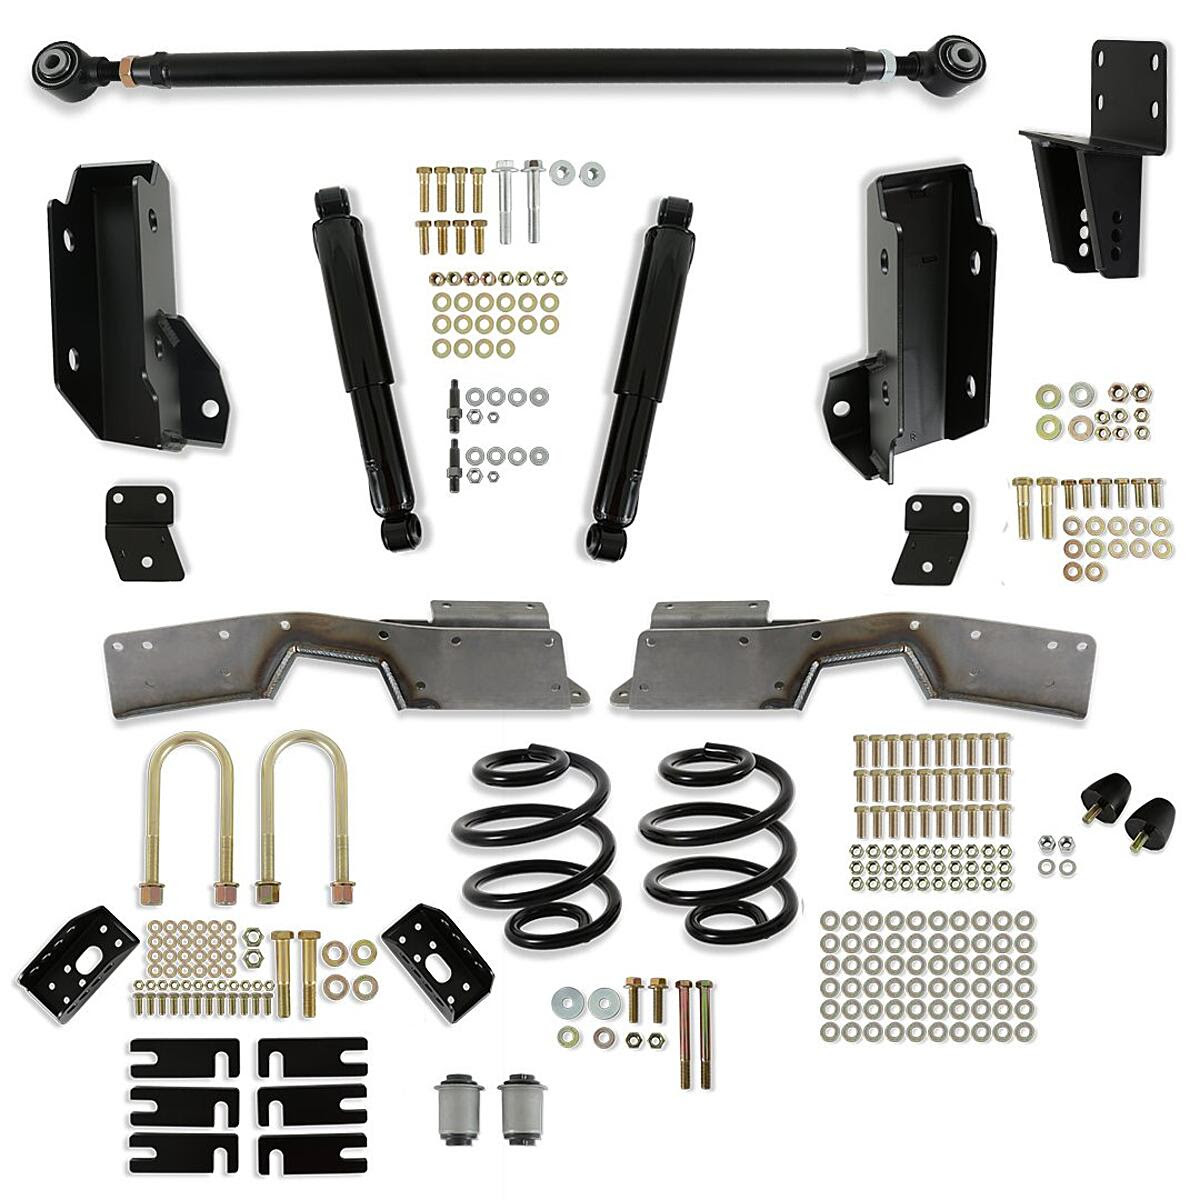 New Product: Detroit Speed Rear Speed Kits For 1967-1972 GM C10 Trucks